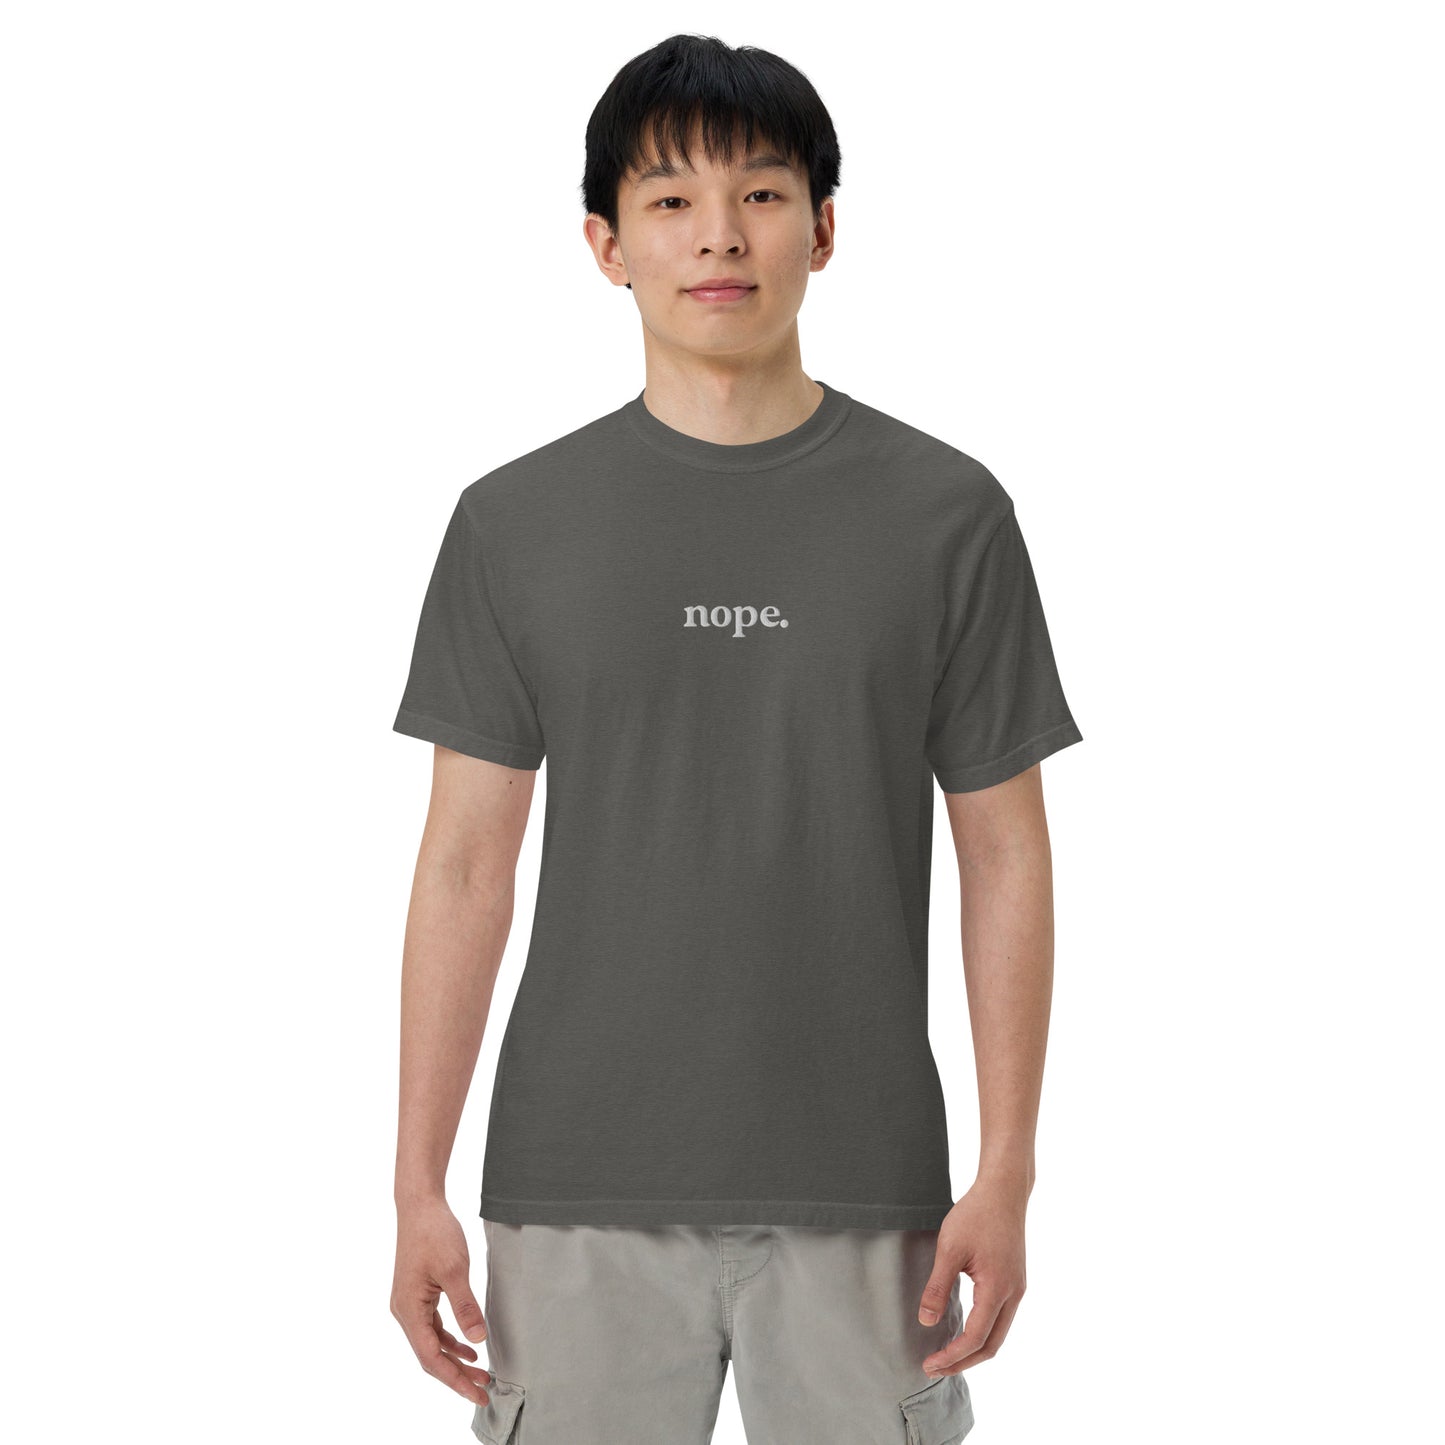 Nope Embroidered Unisex garment-dyed heavyweight t-shirt